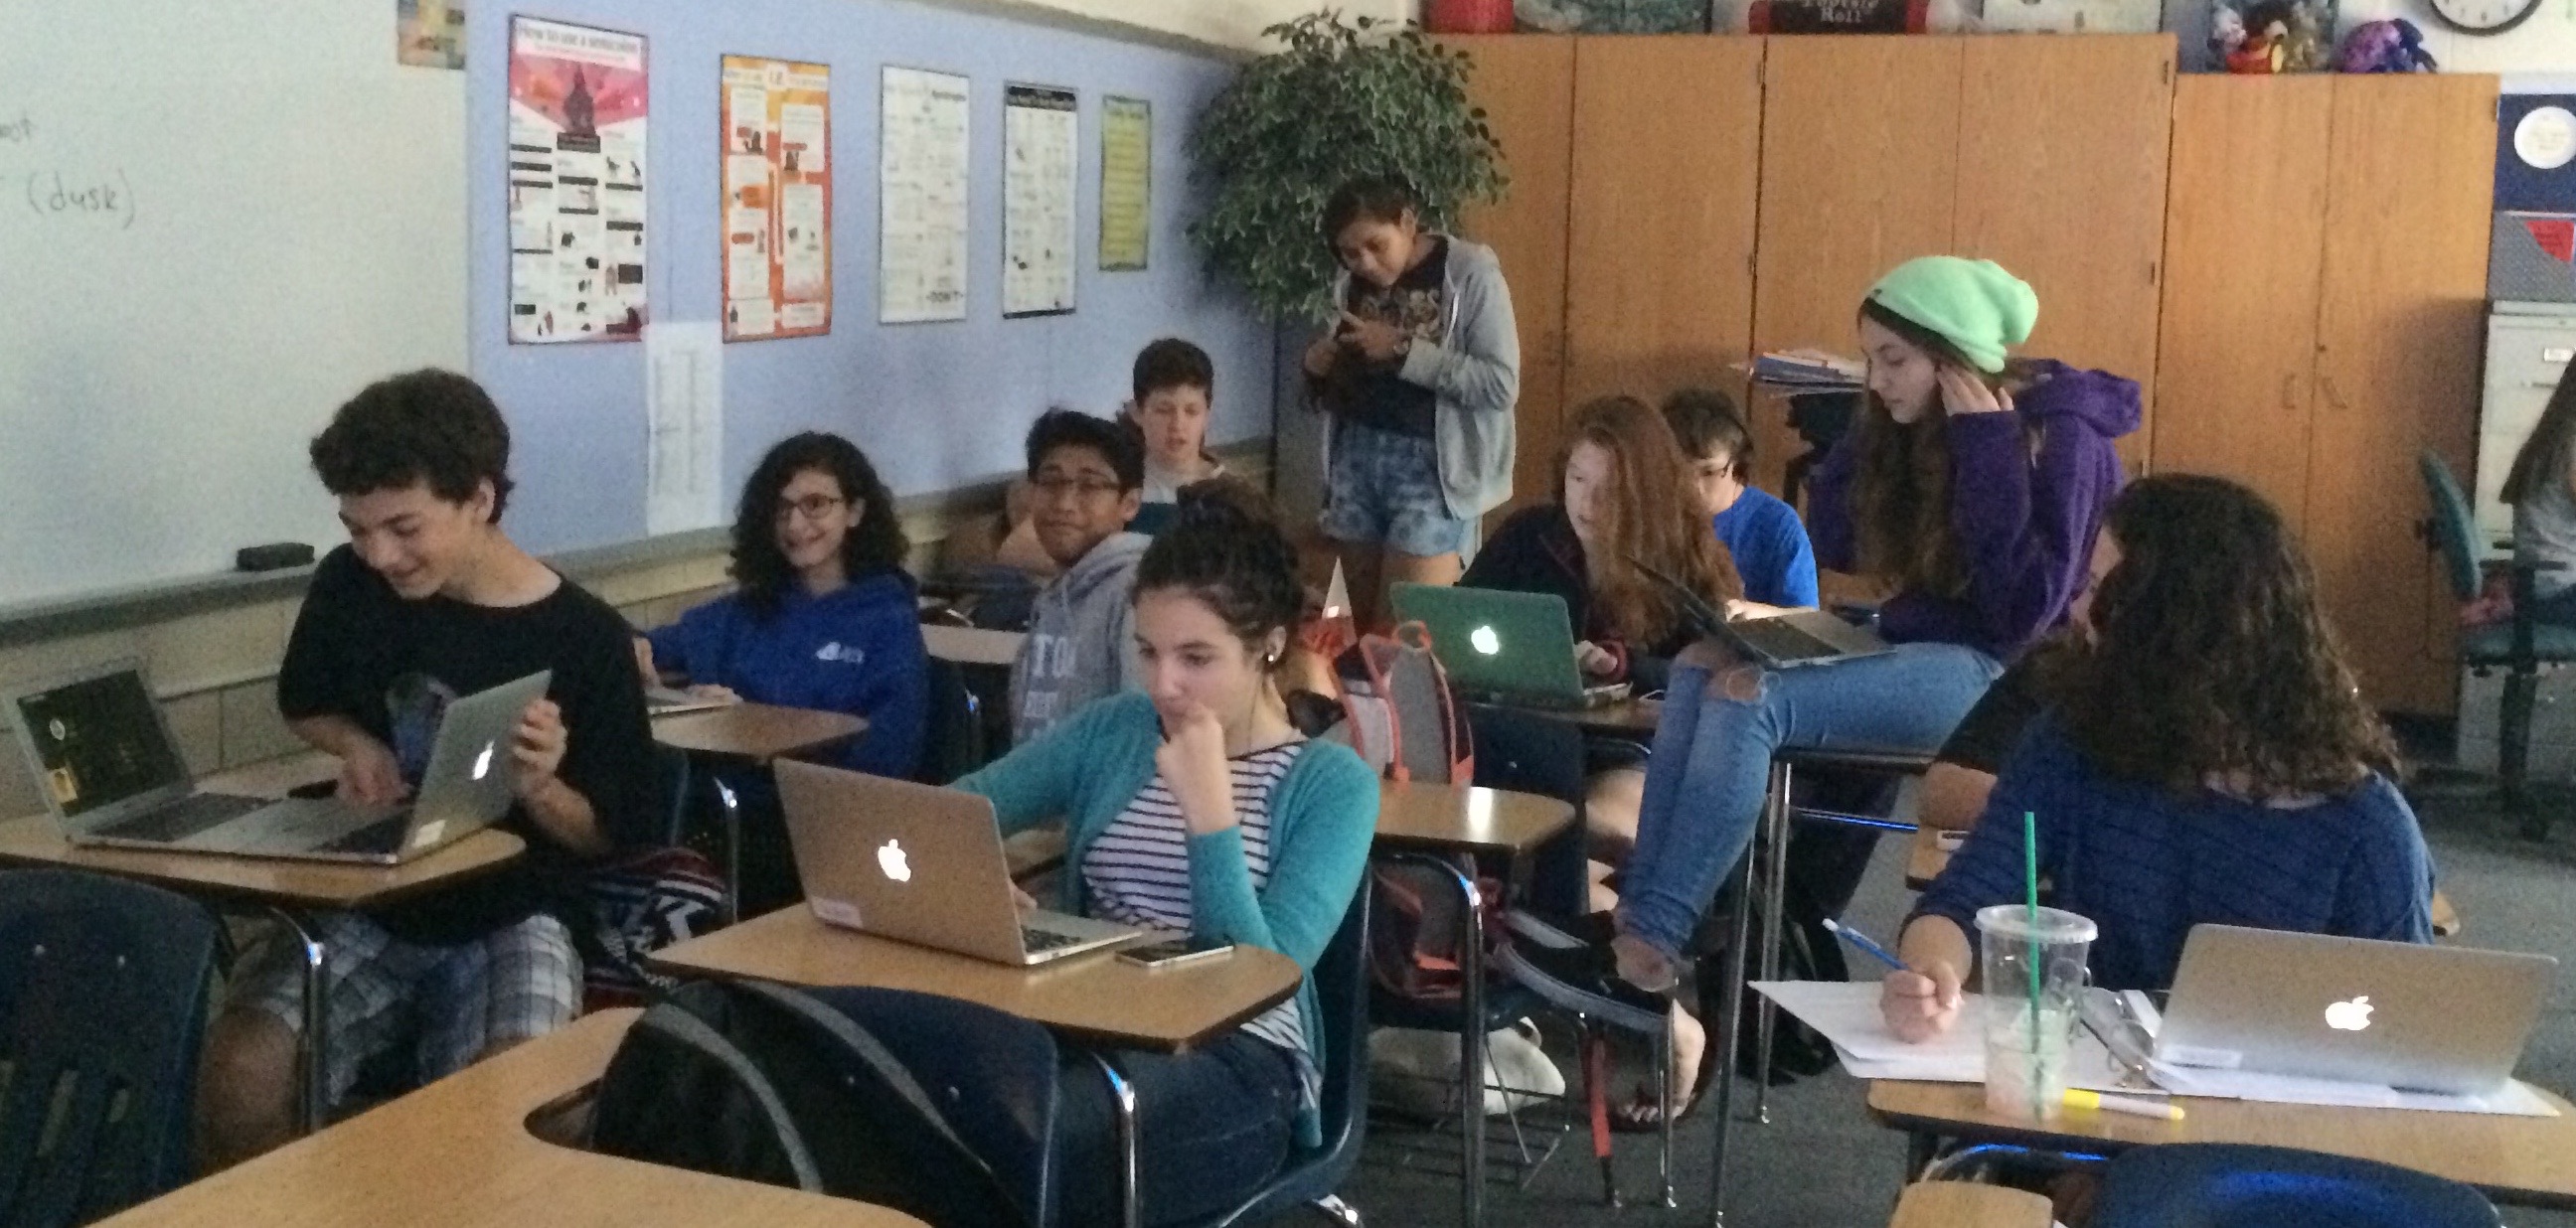 students using MacBook Airs in classroom